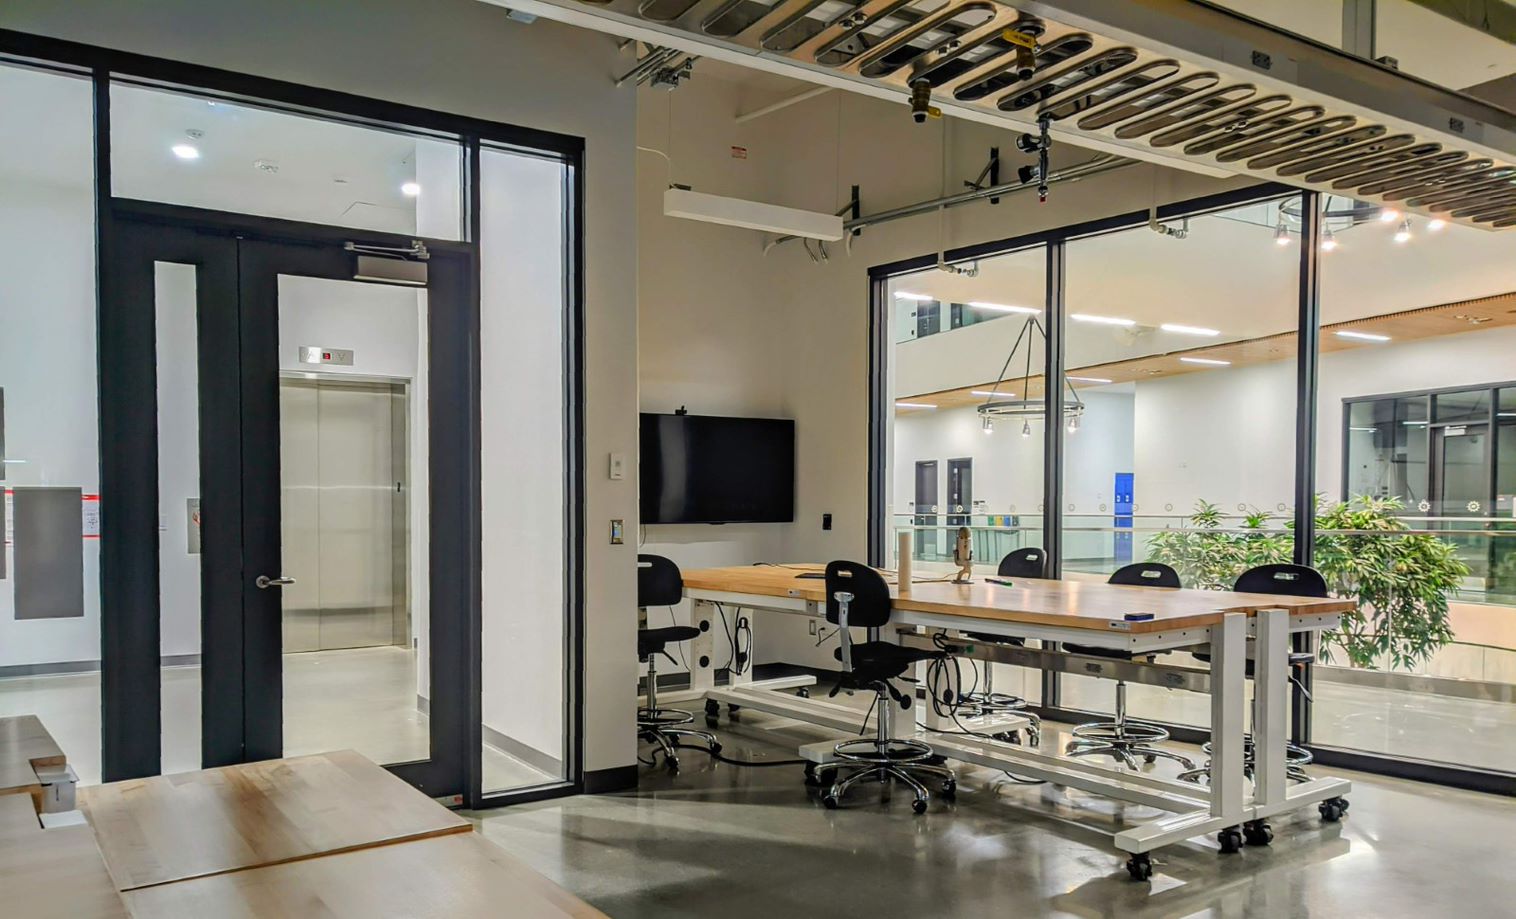 Inside the lab where meetings take place